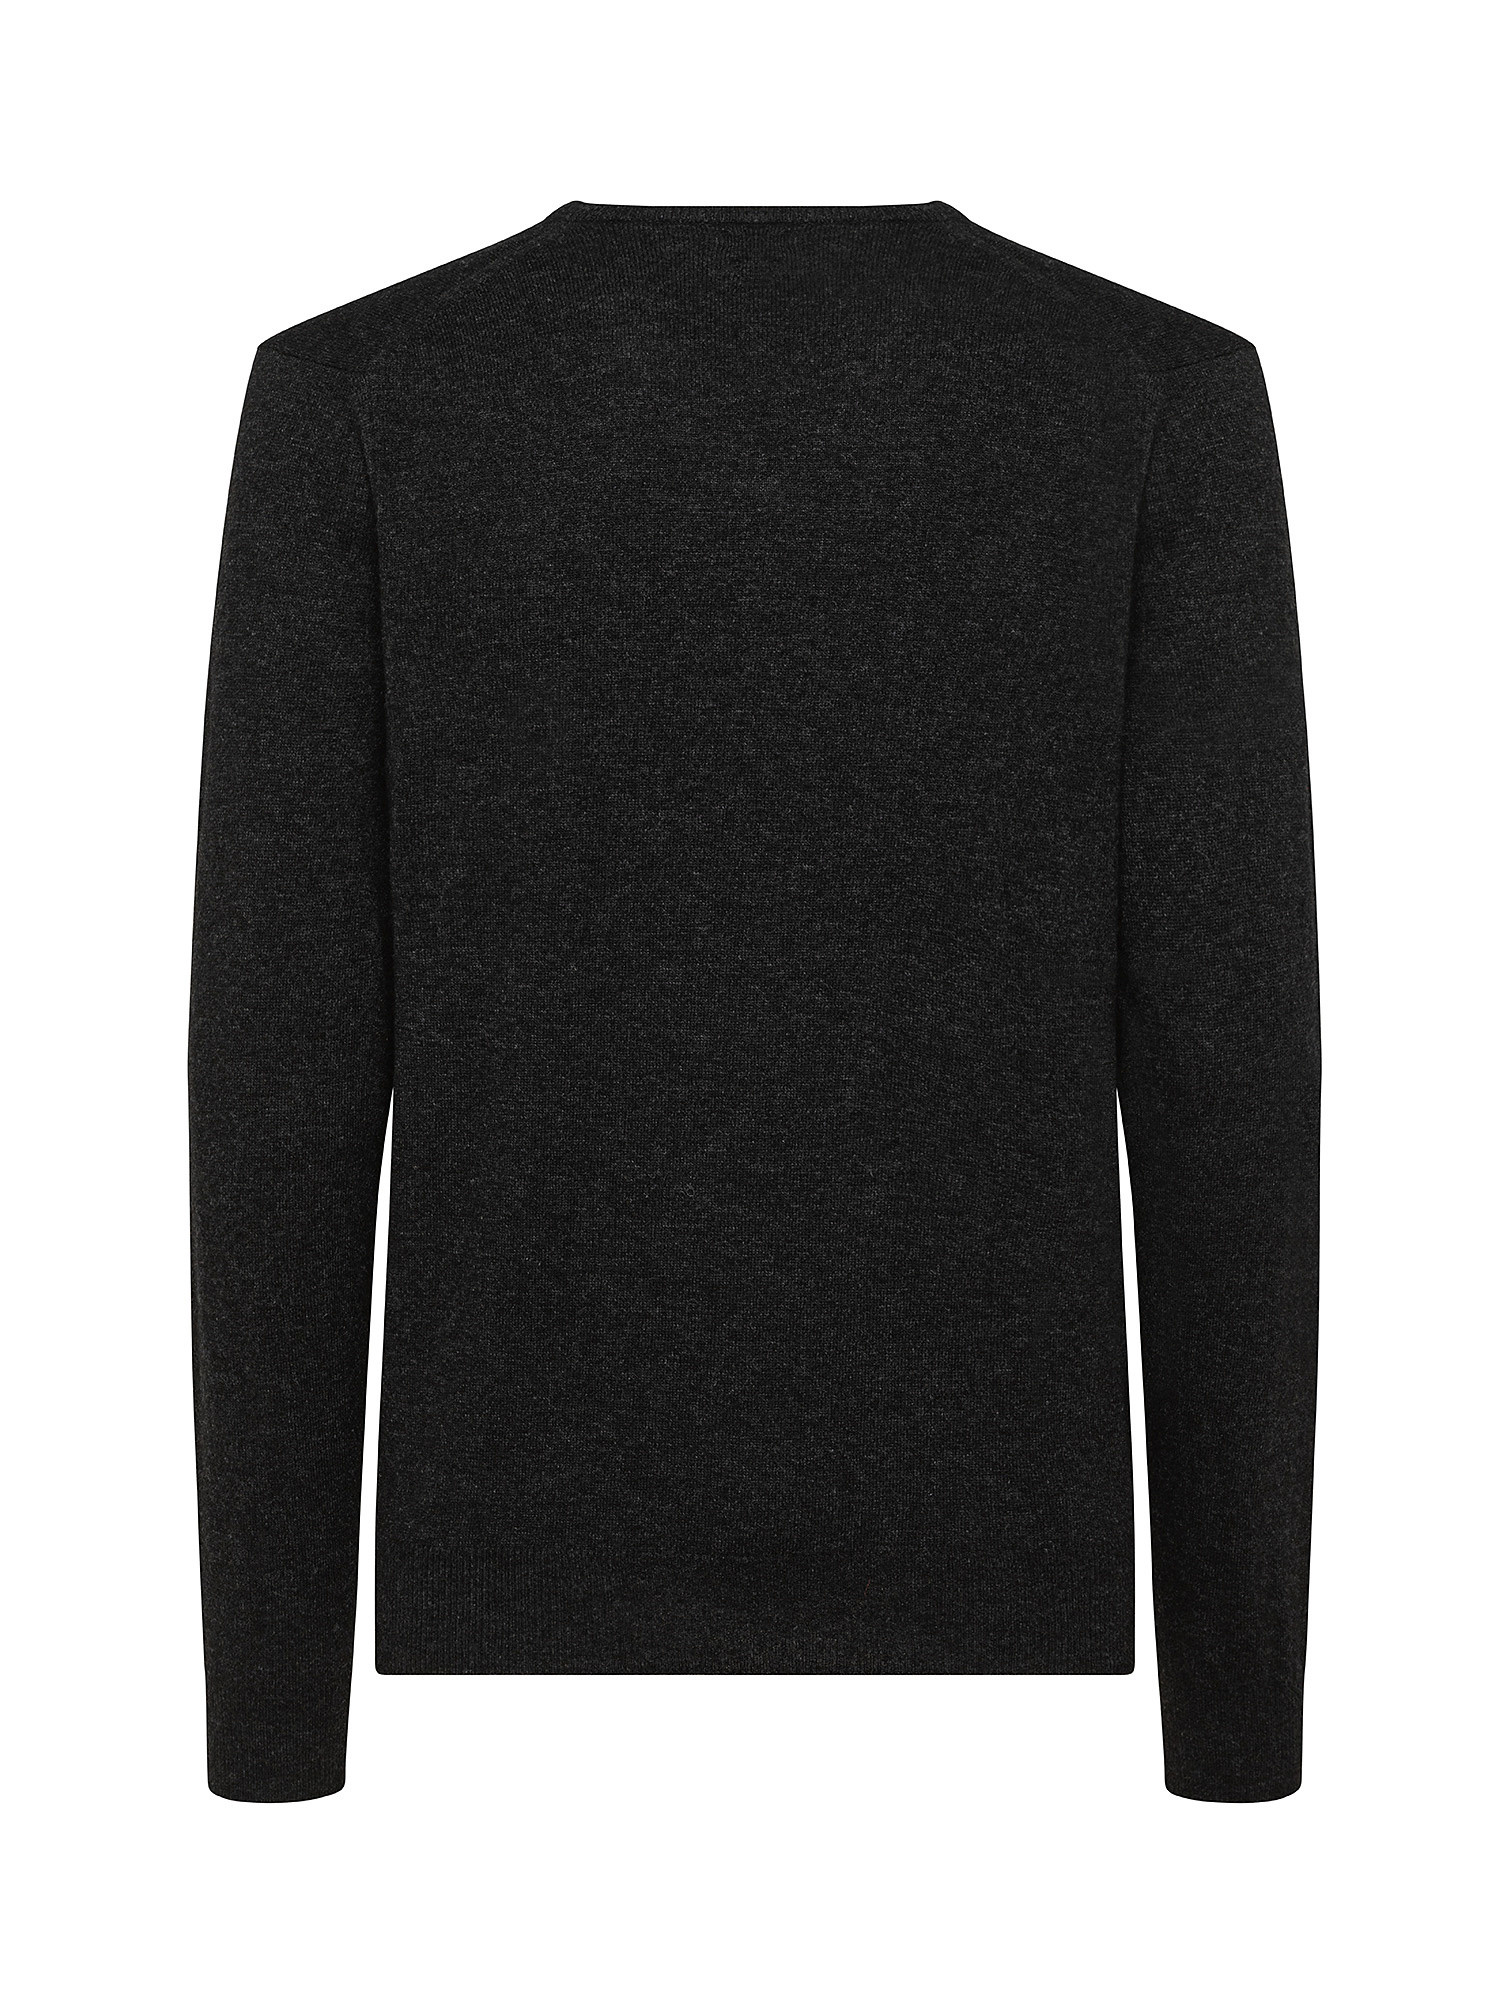 Cashmere Blend V-neck sweater with noble fibers, Anthracite, large image number 1